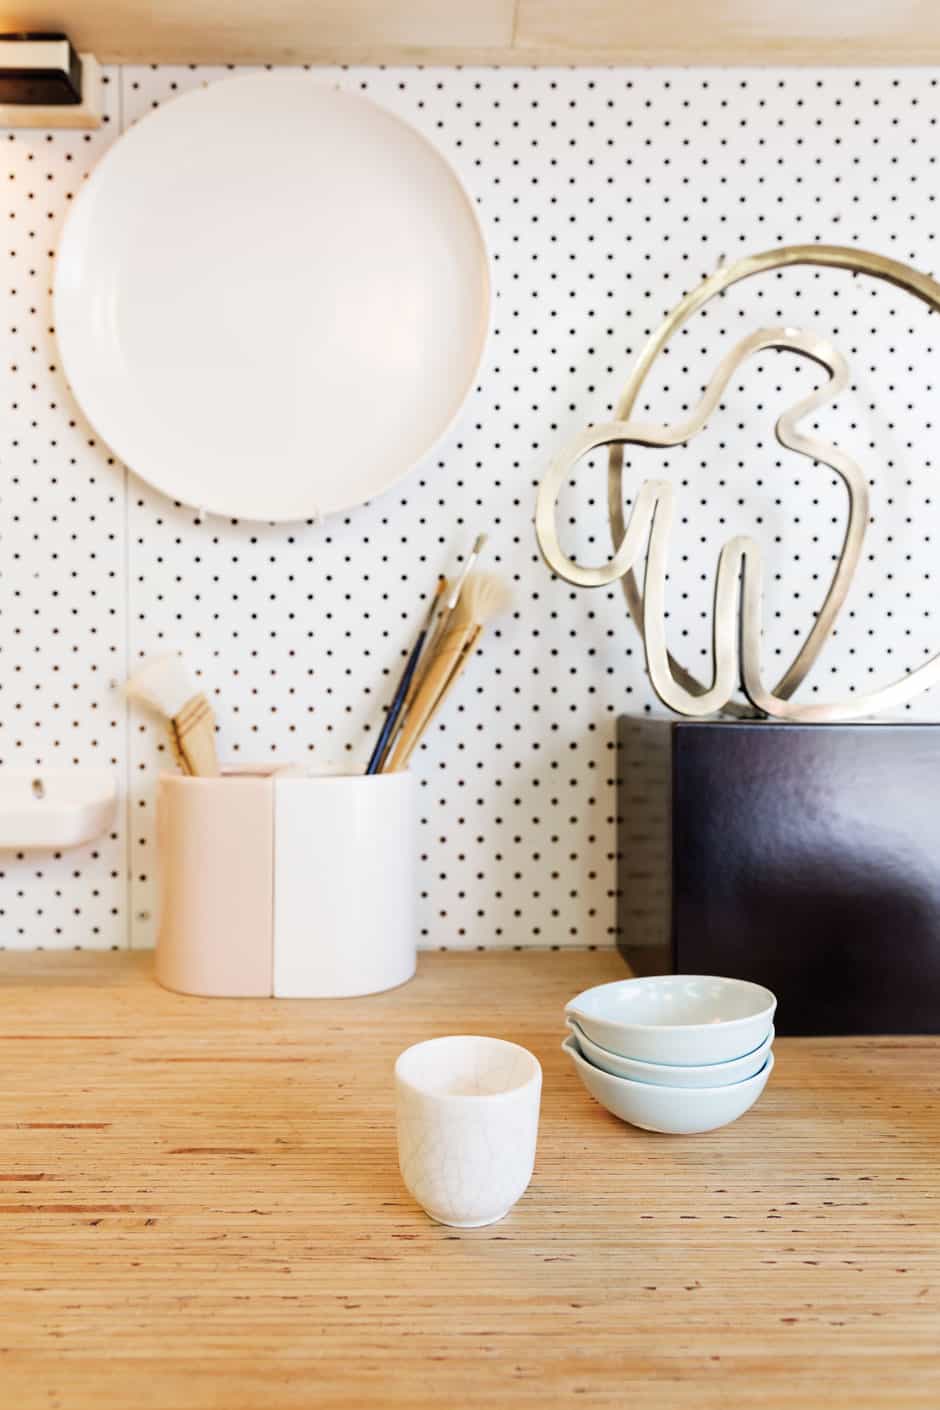 RIGHT Domestic ware from Gidon’s ceramics range sits on the workbench alongside an electroplated brass sculpture and pink-and-white bookends designed for a collaboration between Thing Industries and fashion maven Kate Sylvester.